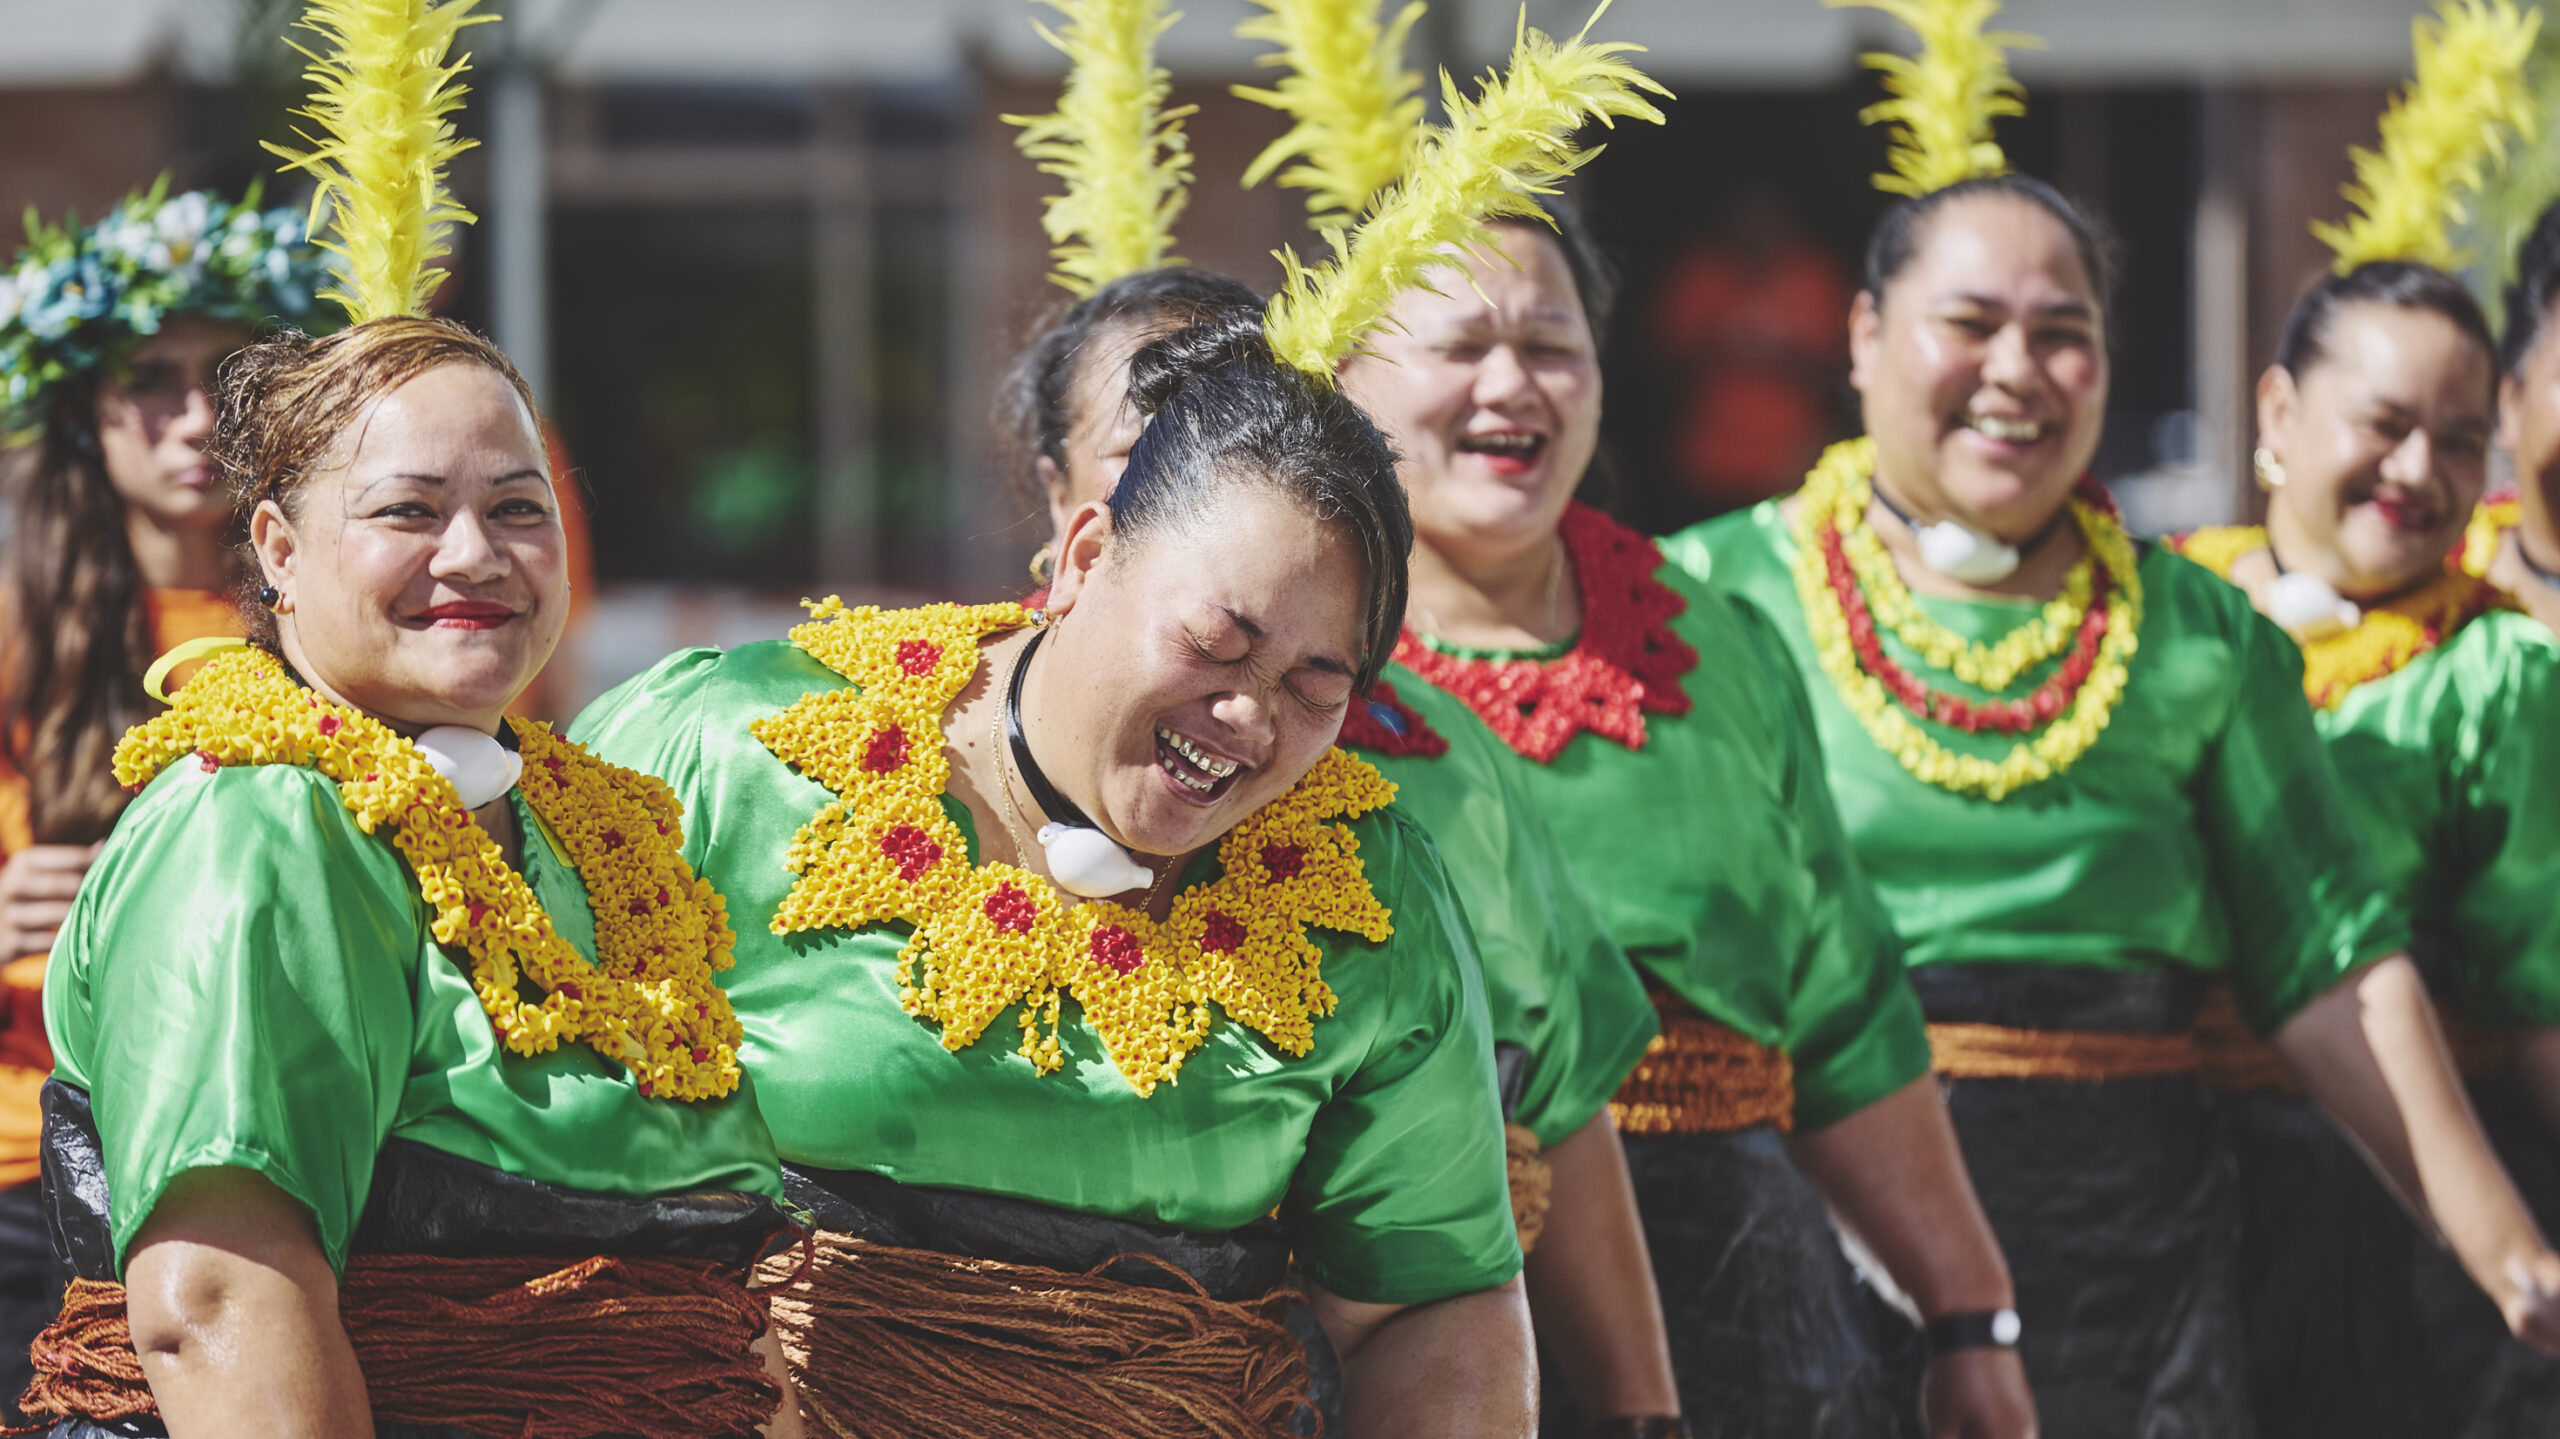 Pasifika performers in costume laughing and smiling